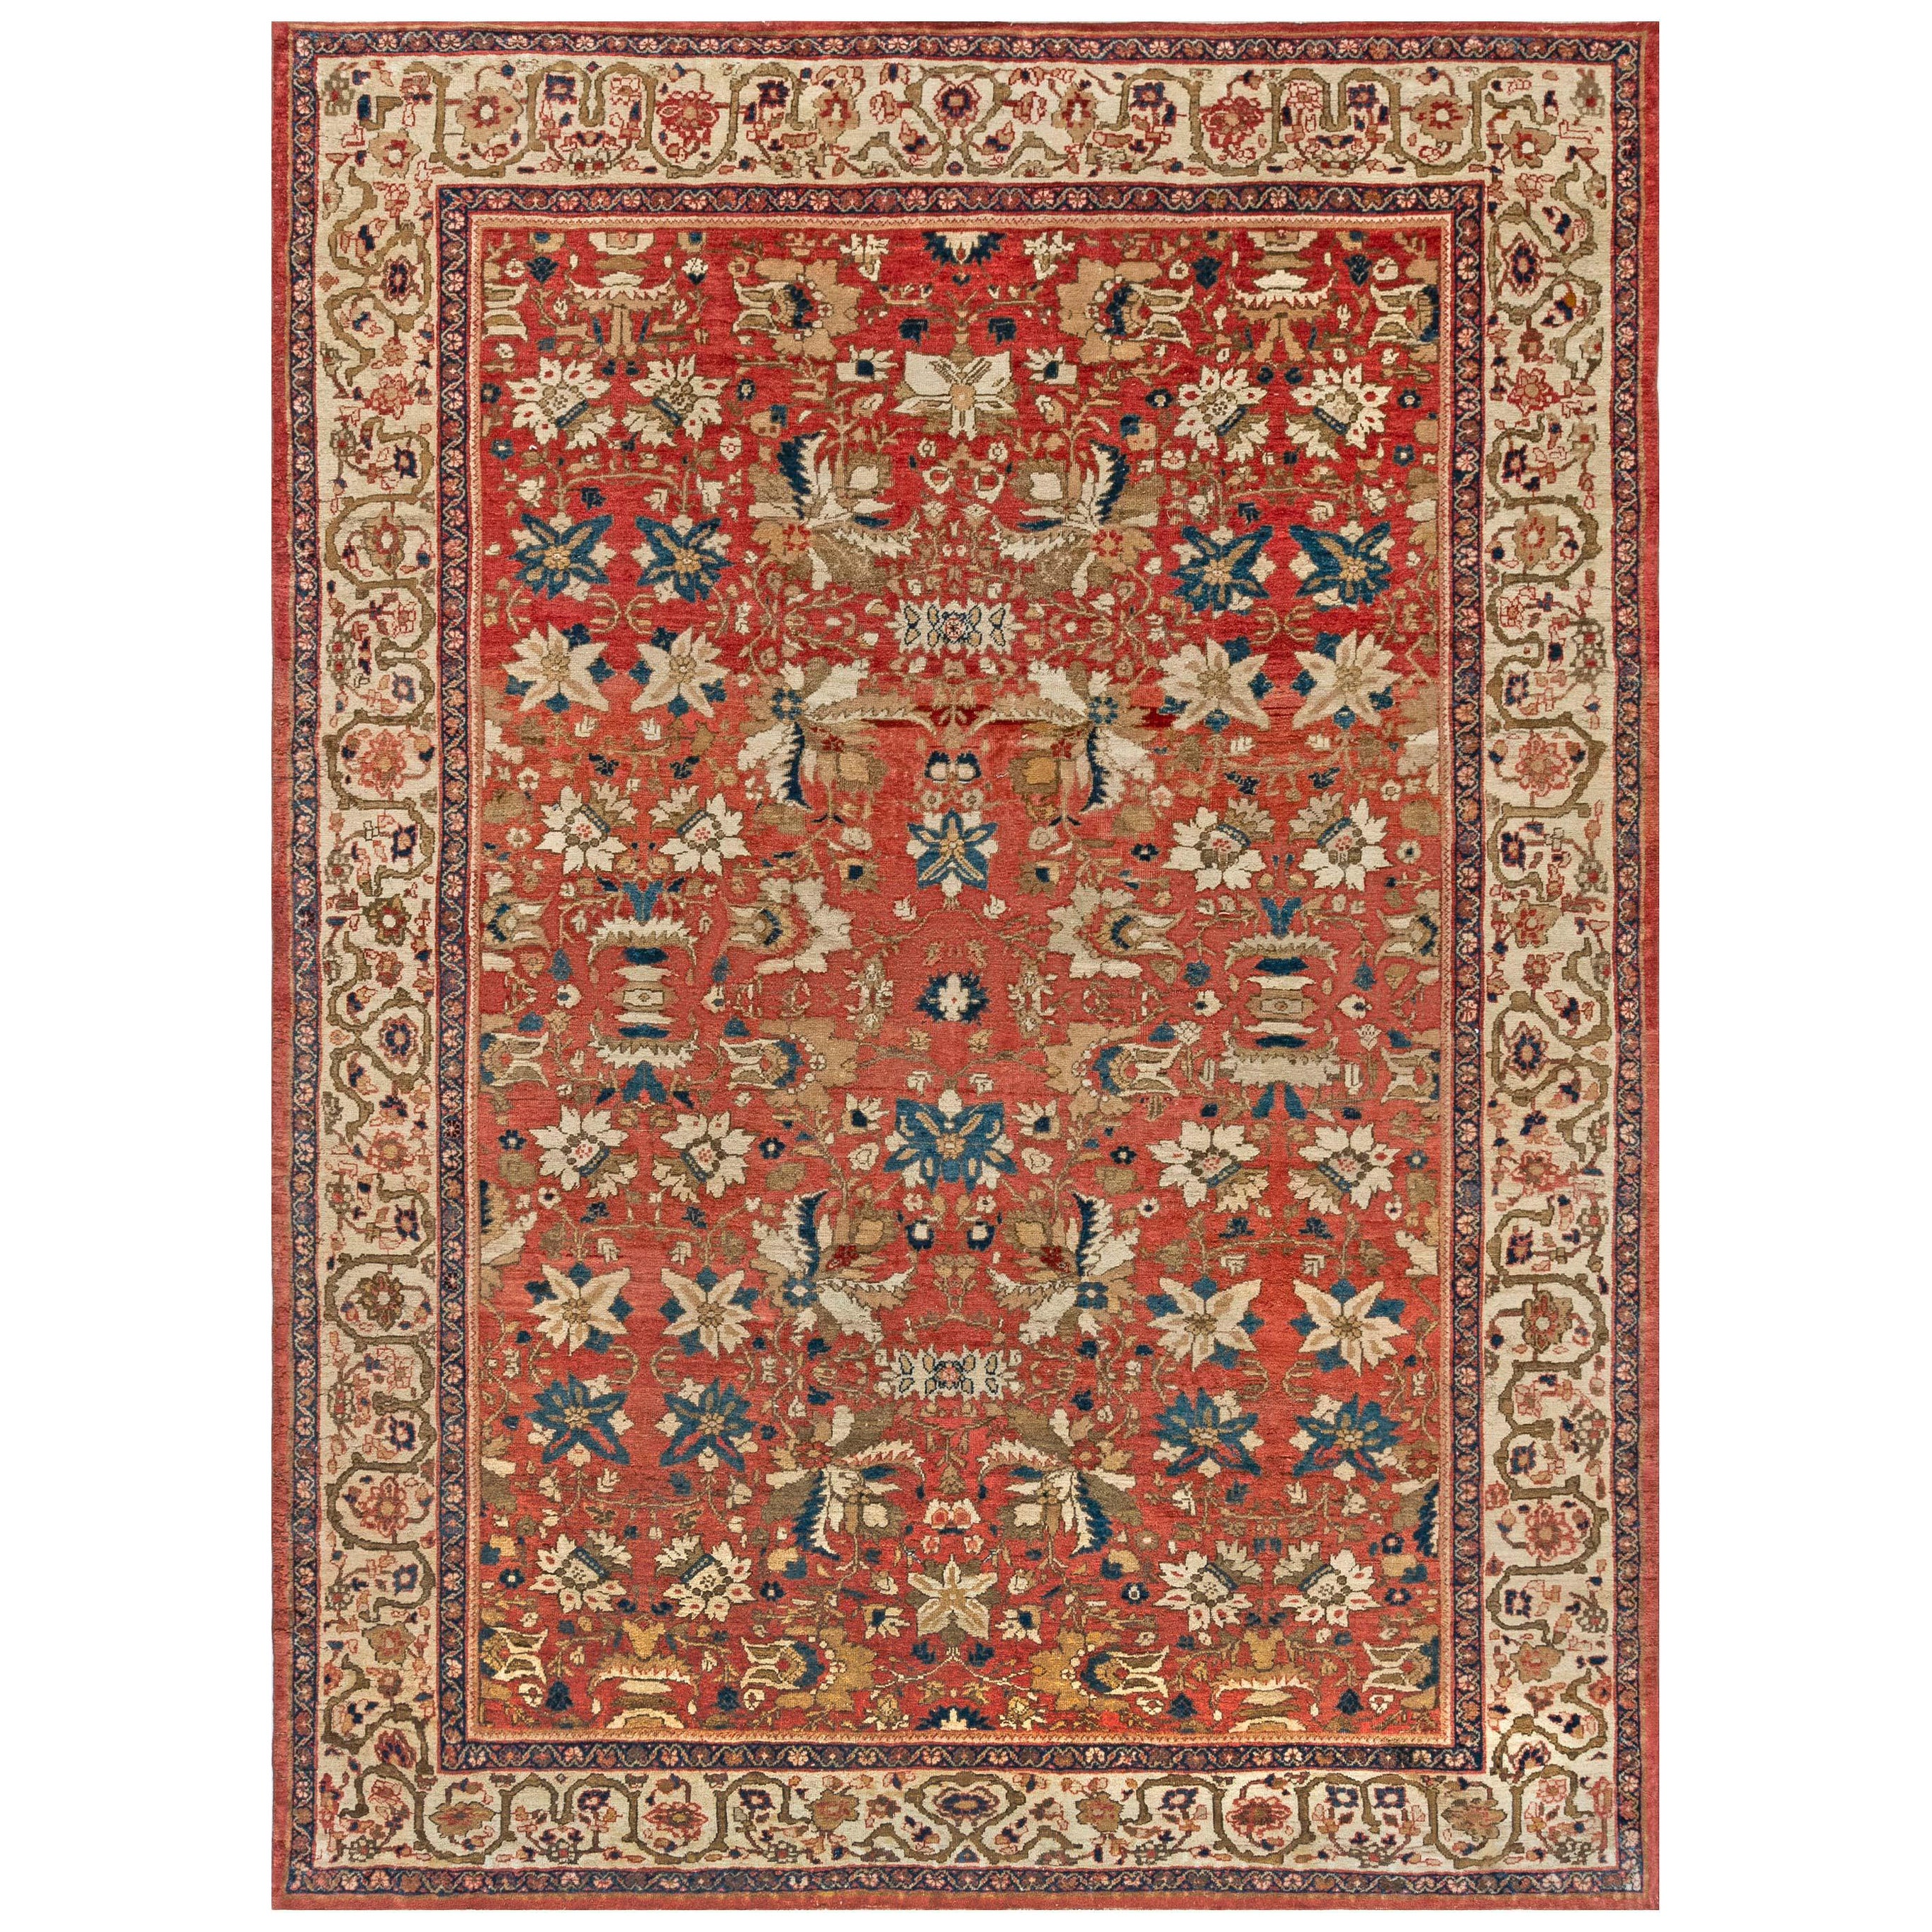 Antique Persian Sultanabad Floral Red Background Handmade Wool Rug